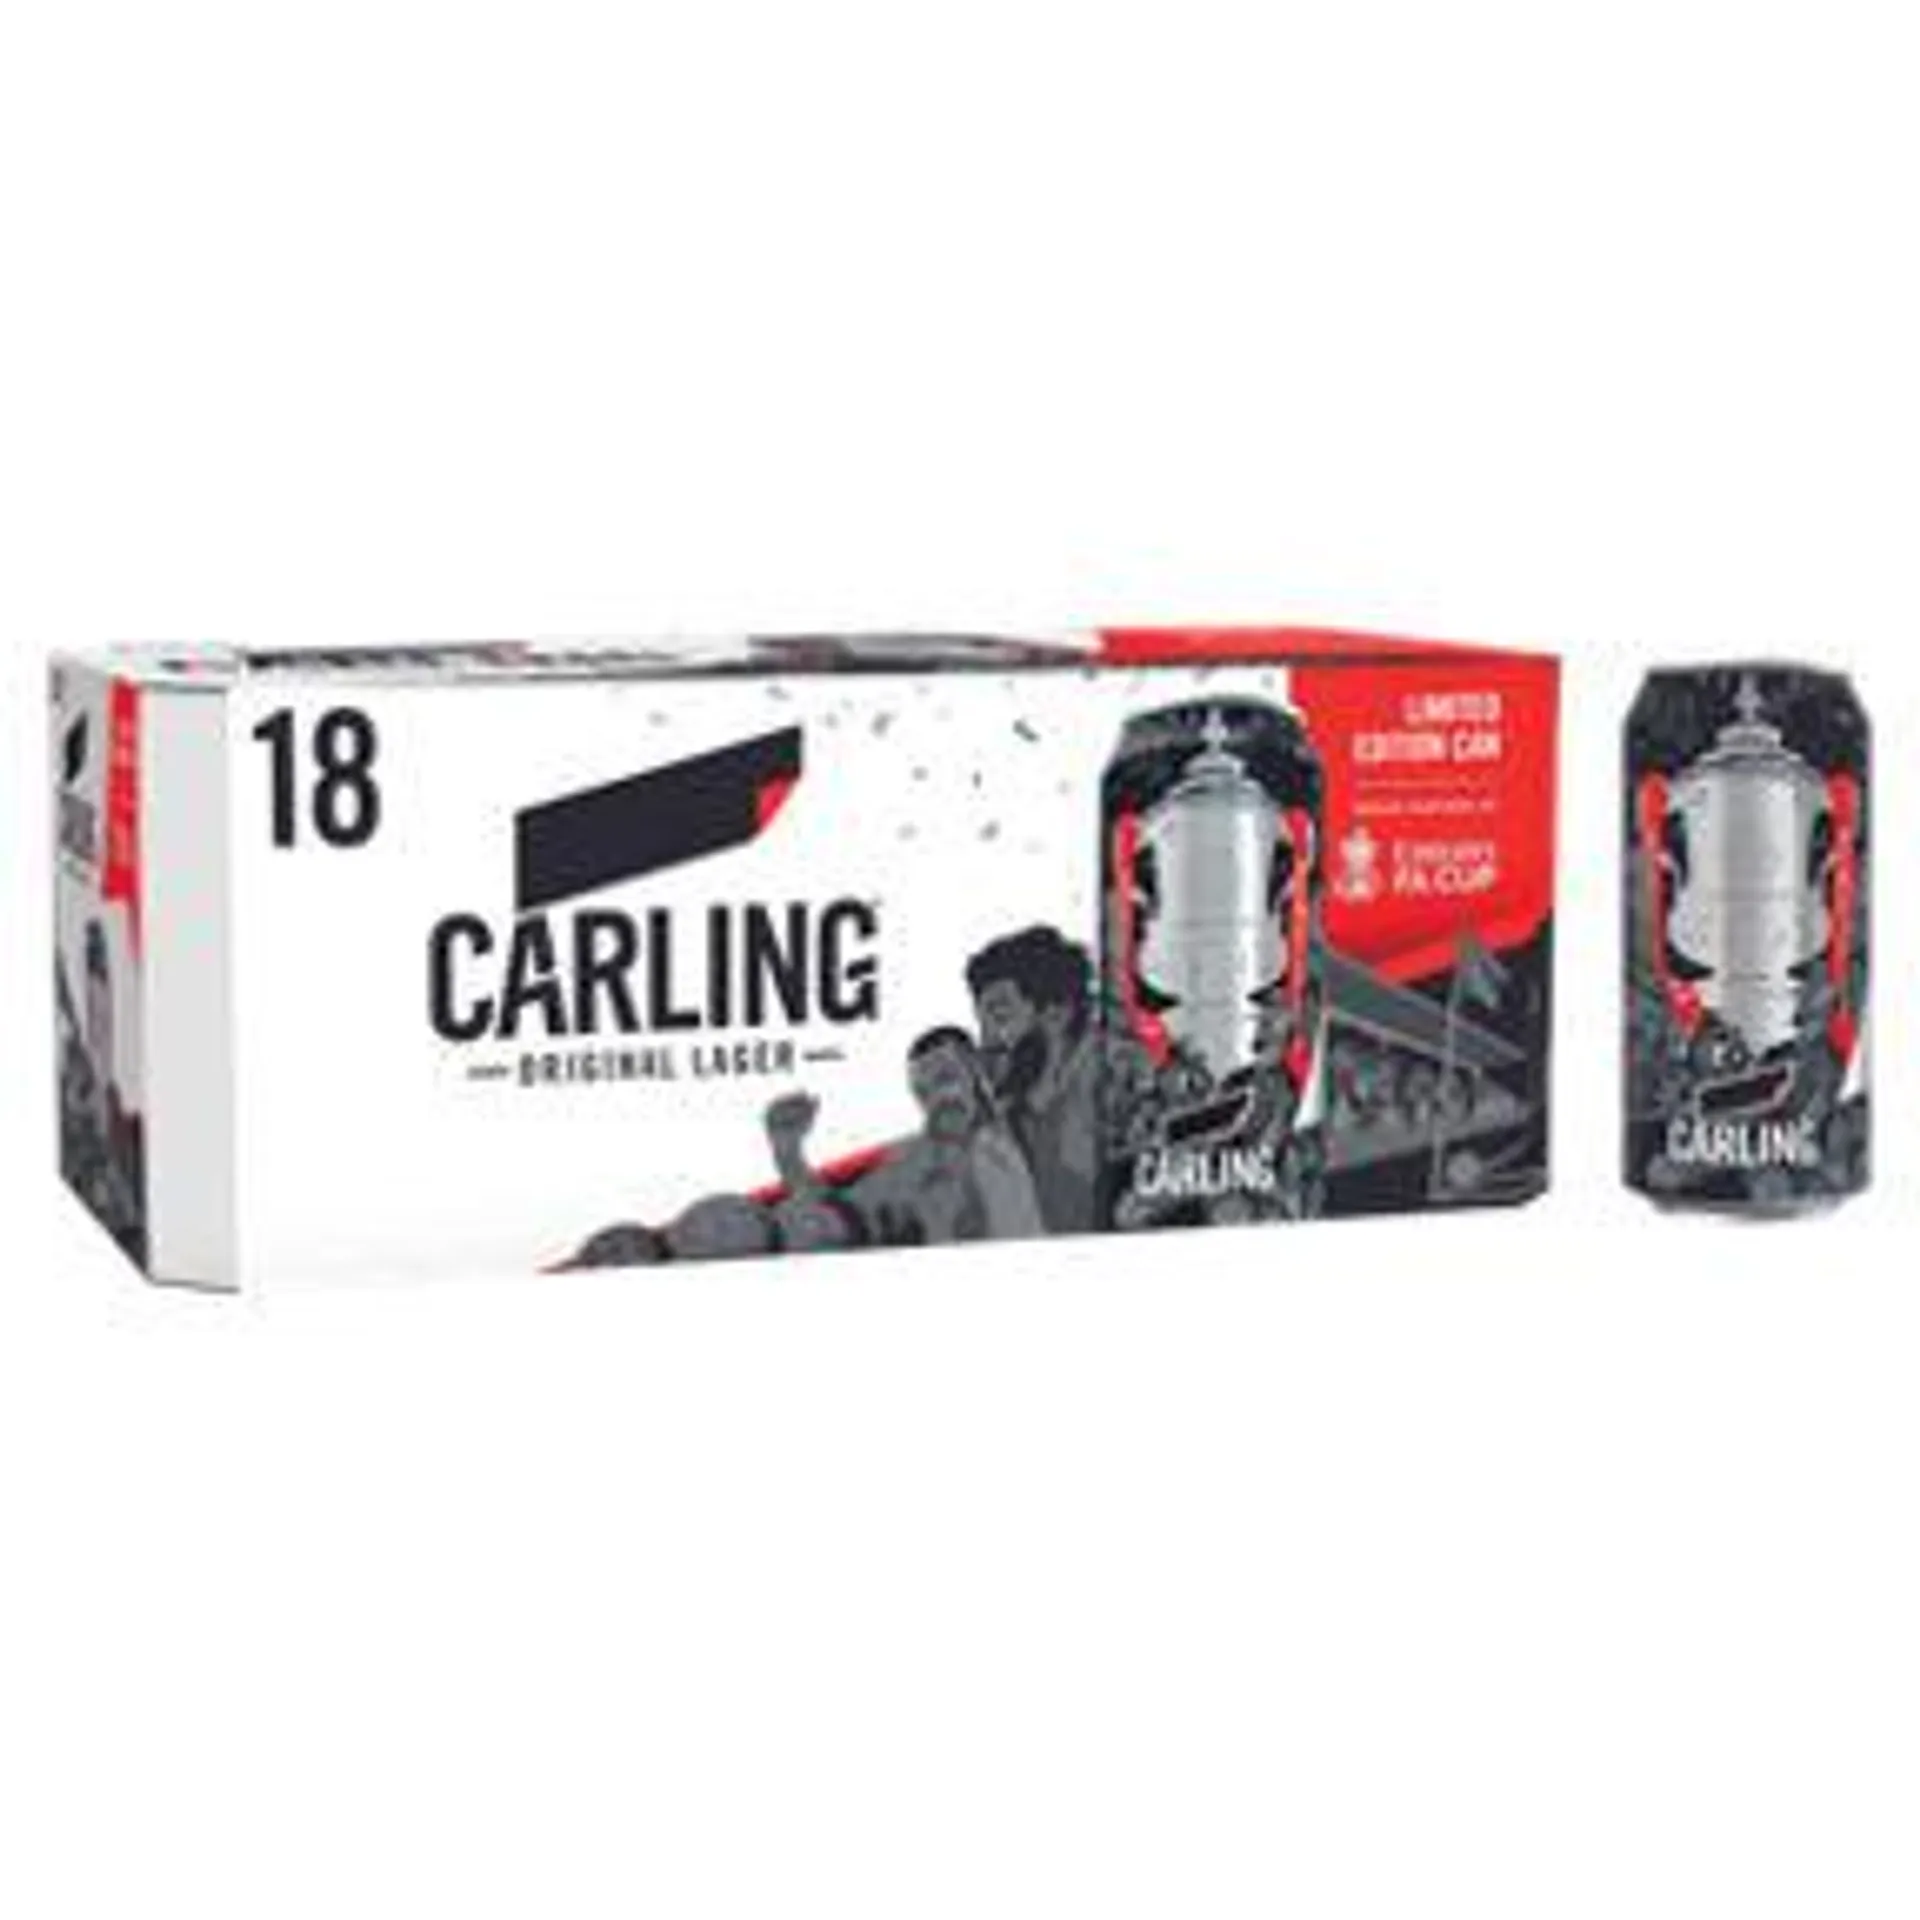 Carling Lager 18 Pack